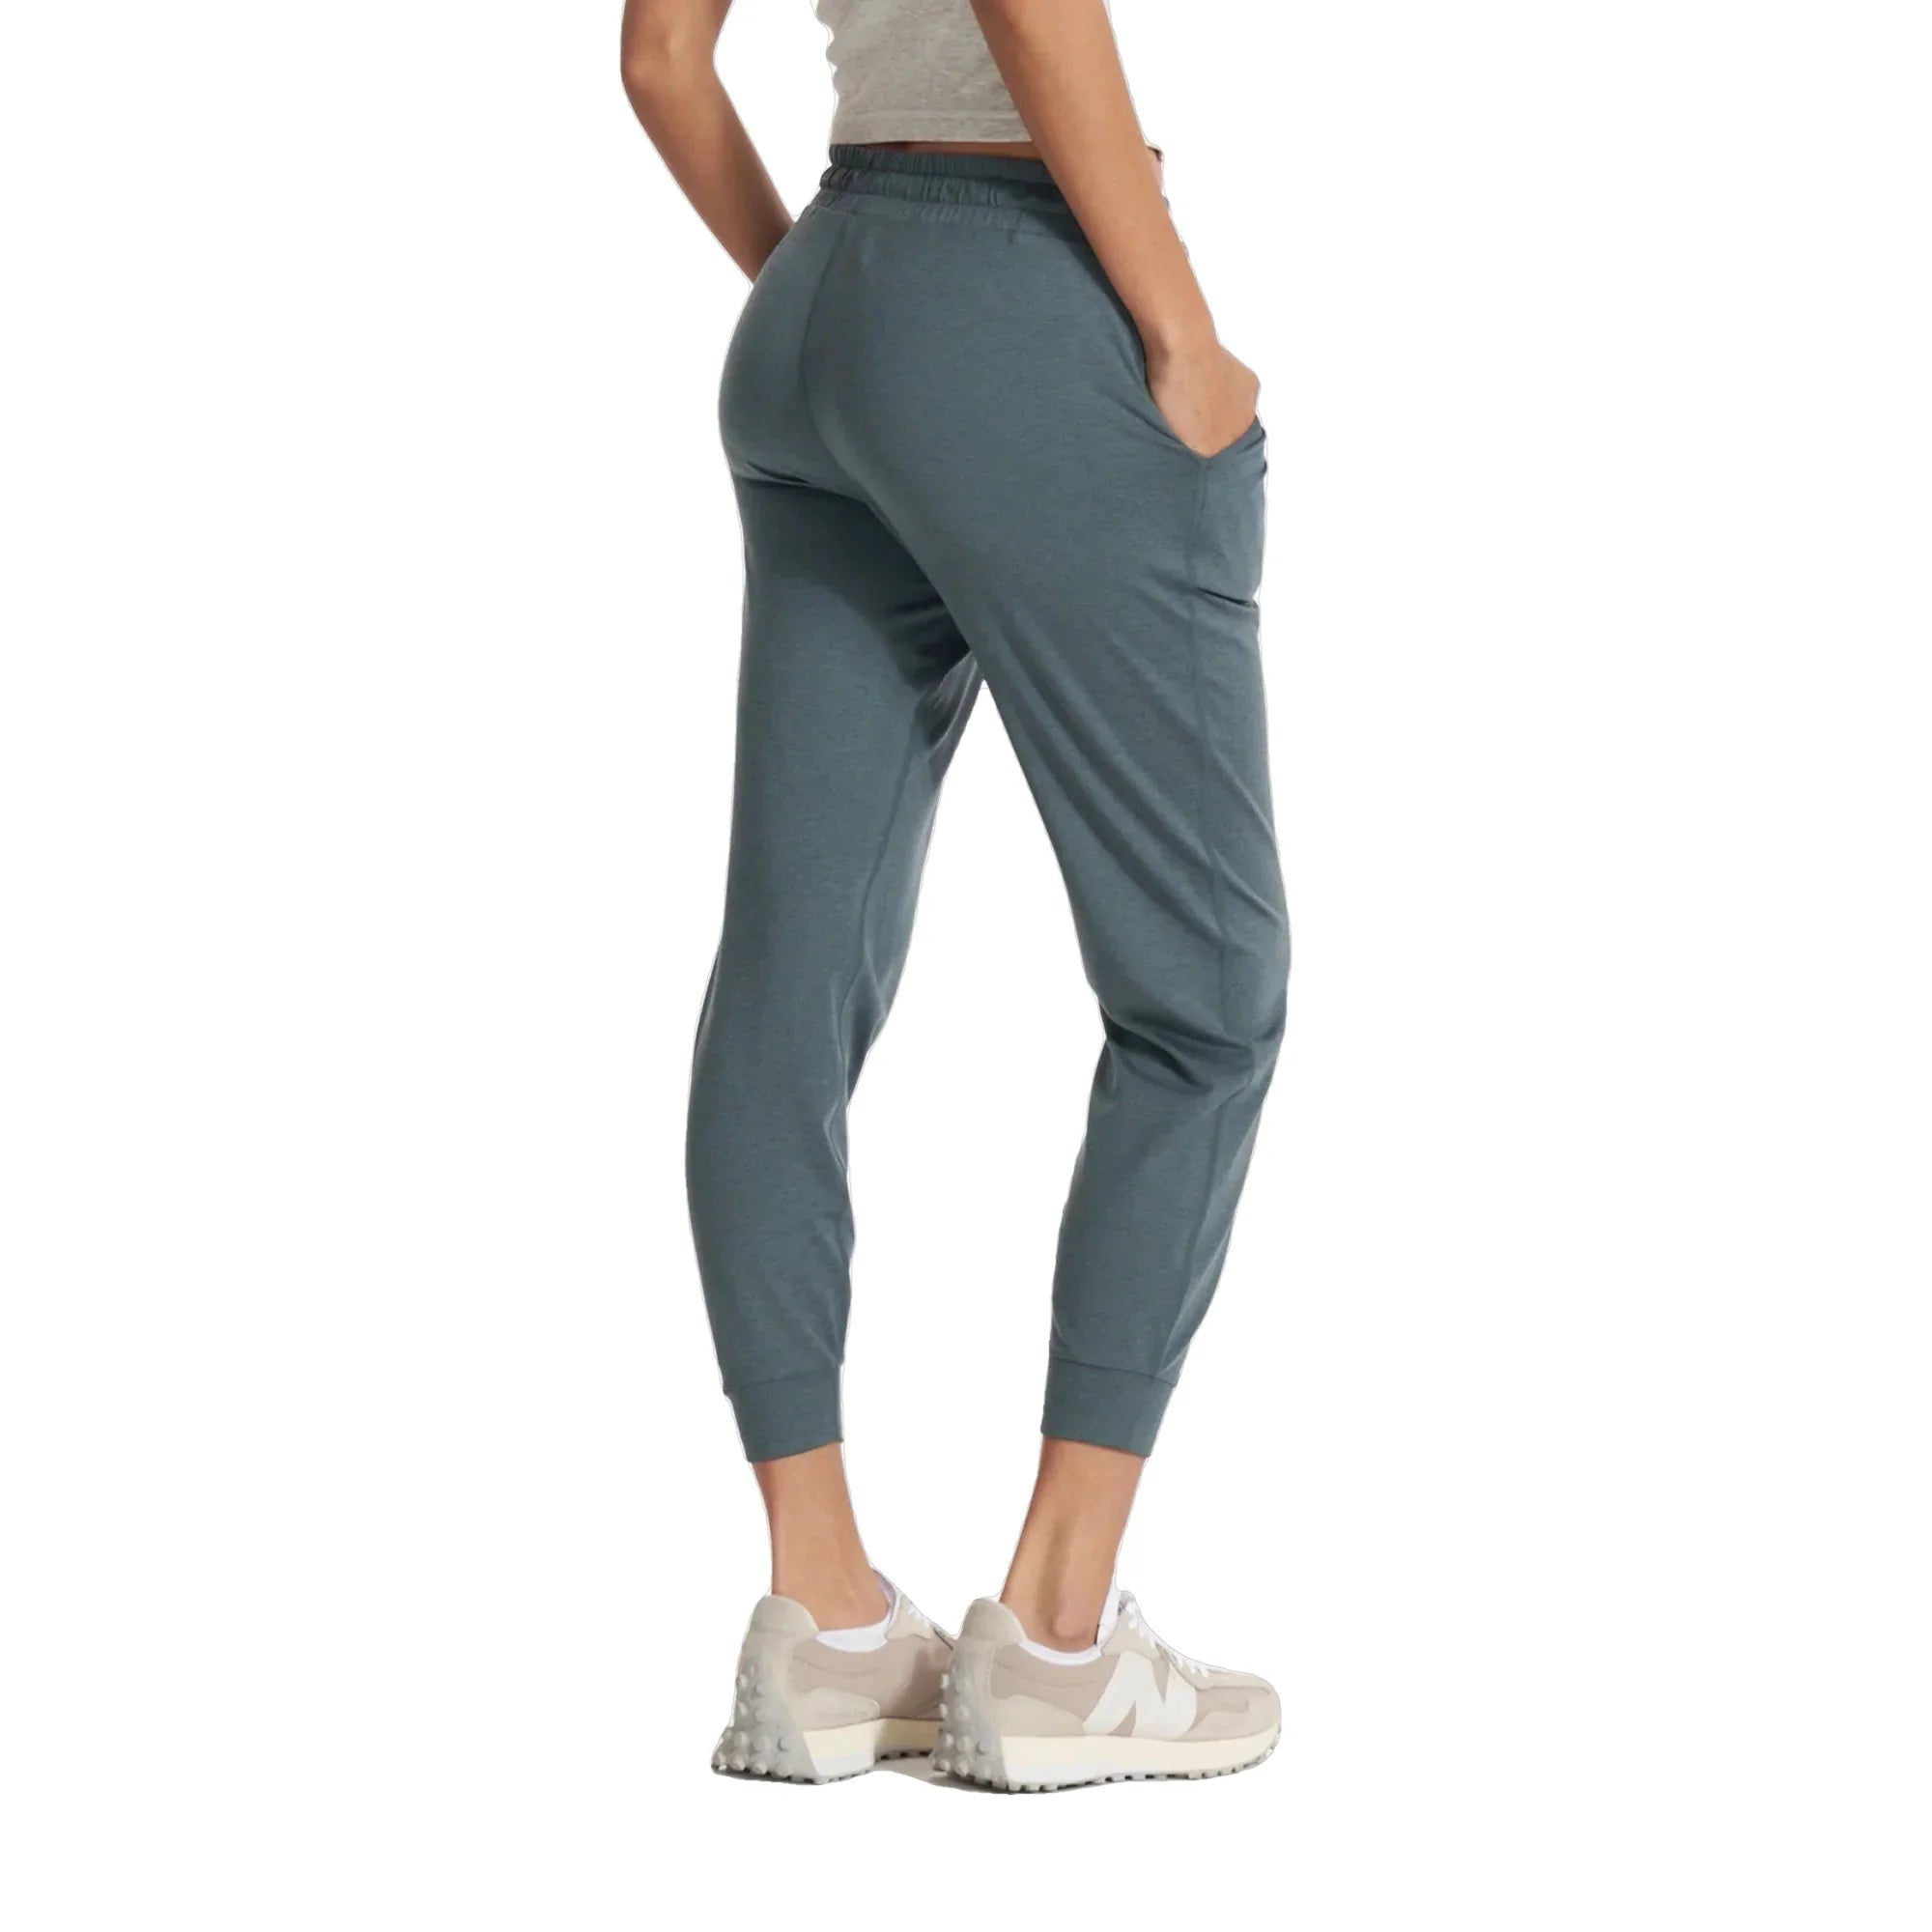 Vuori Women's Performance Jogger shown on model in Lake Heather, a blue-green color.  Back View.